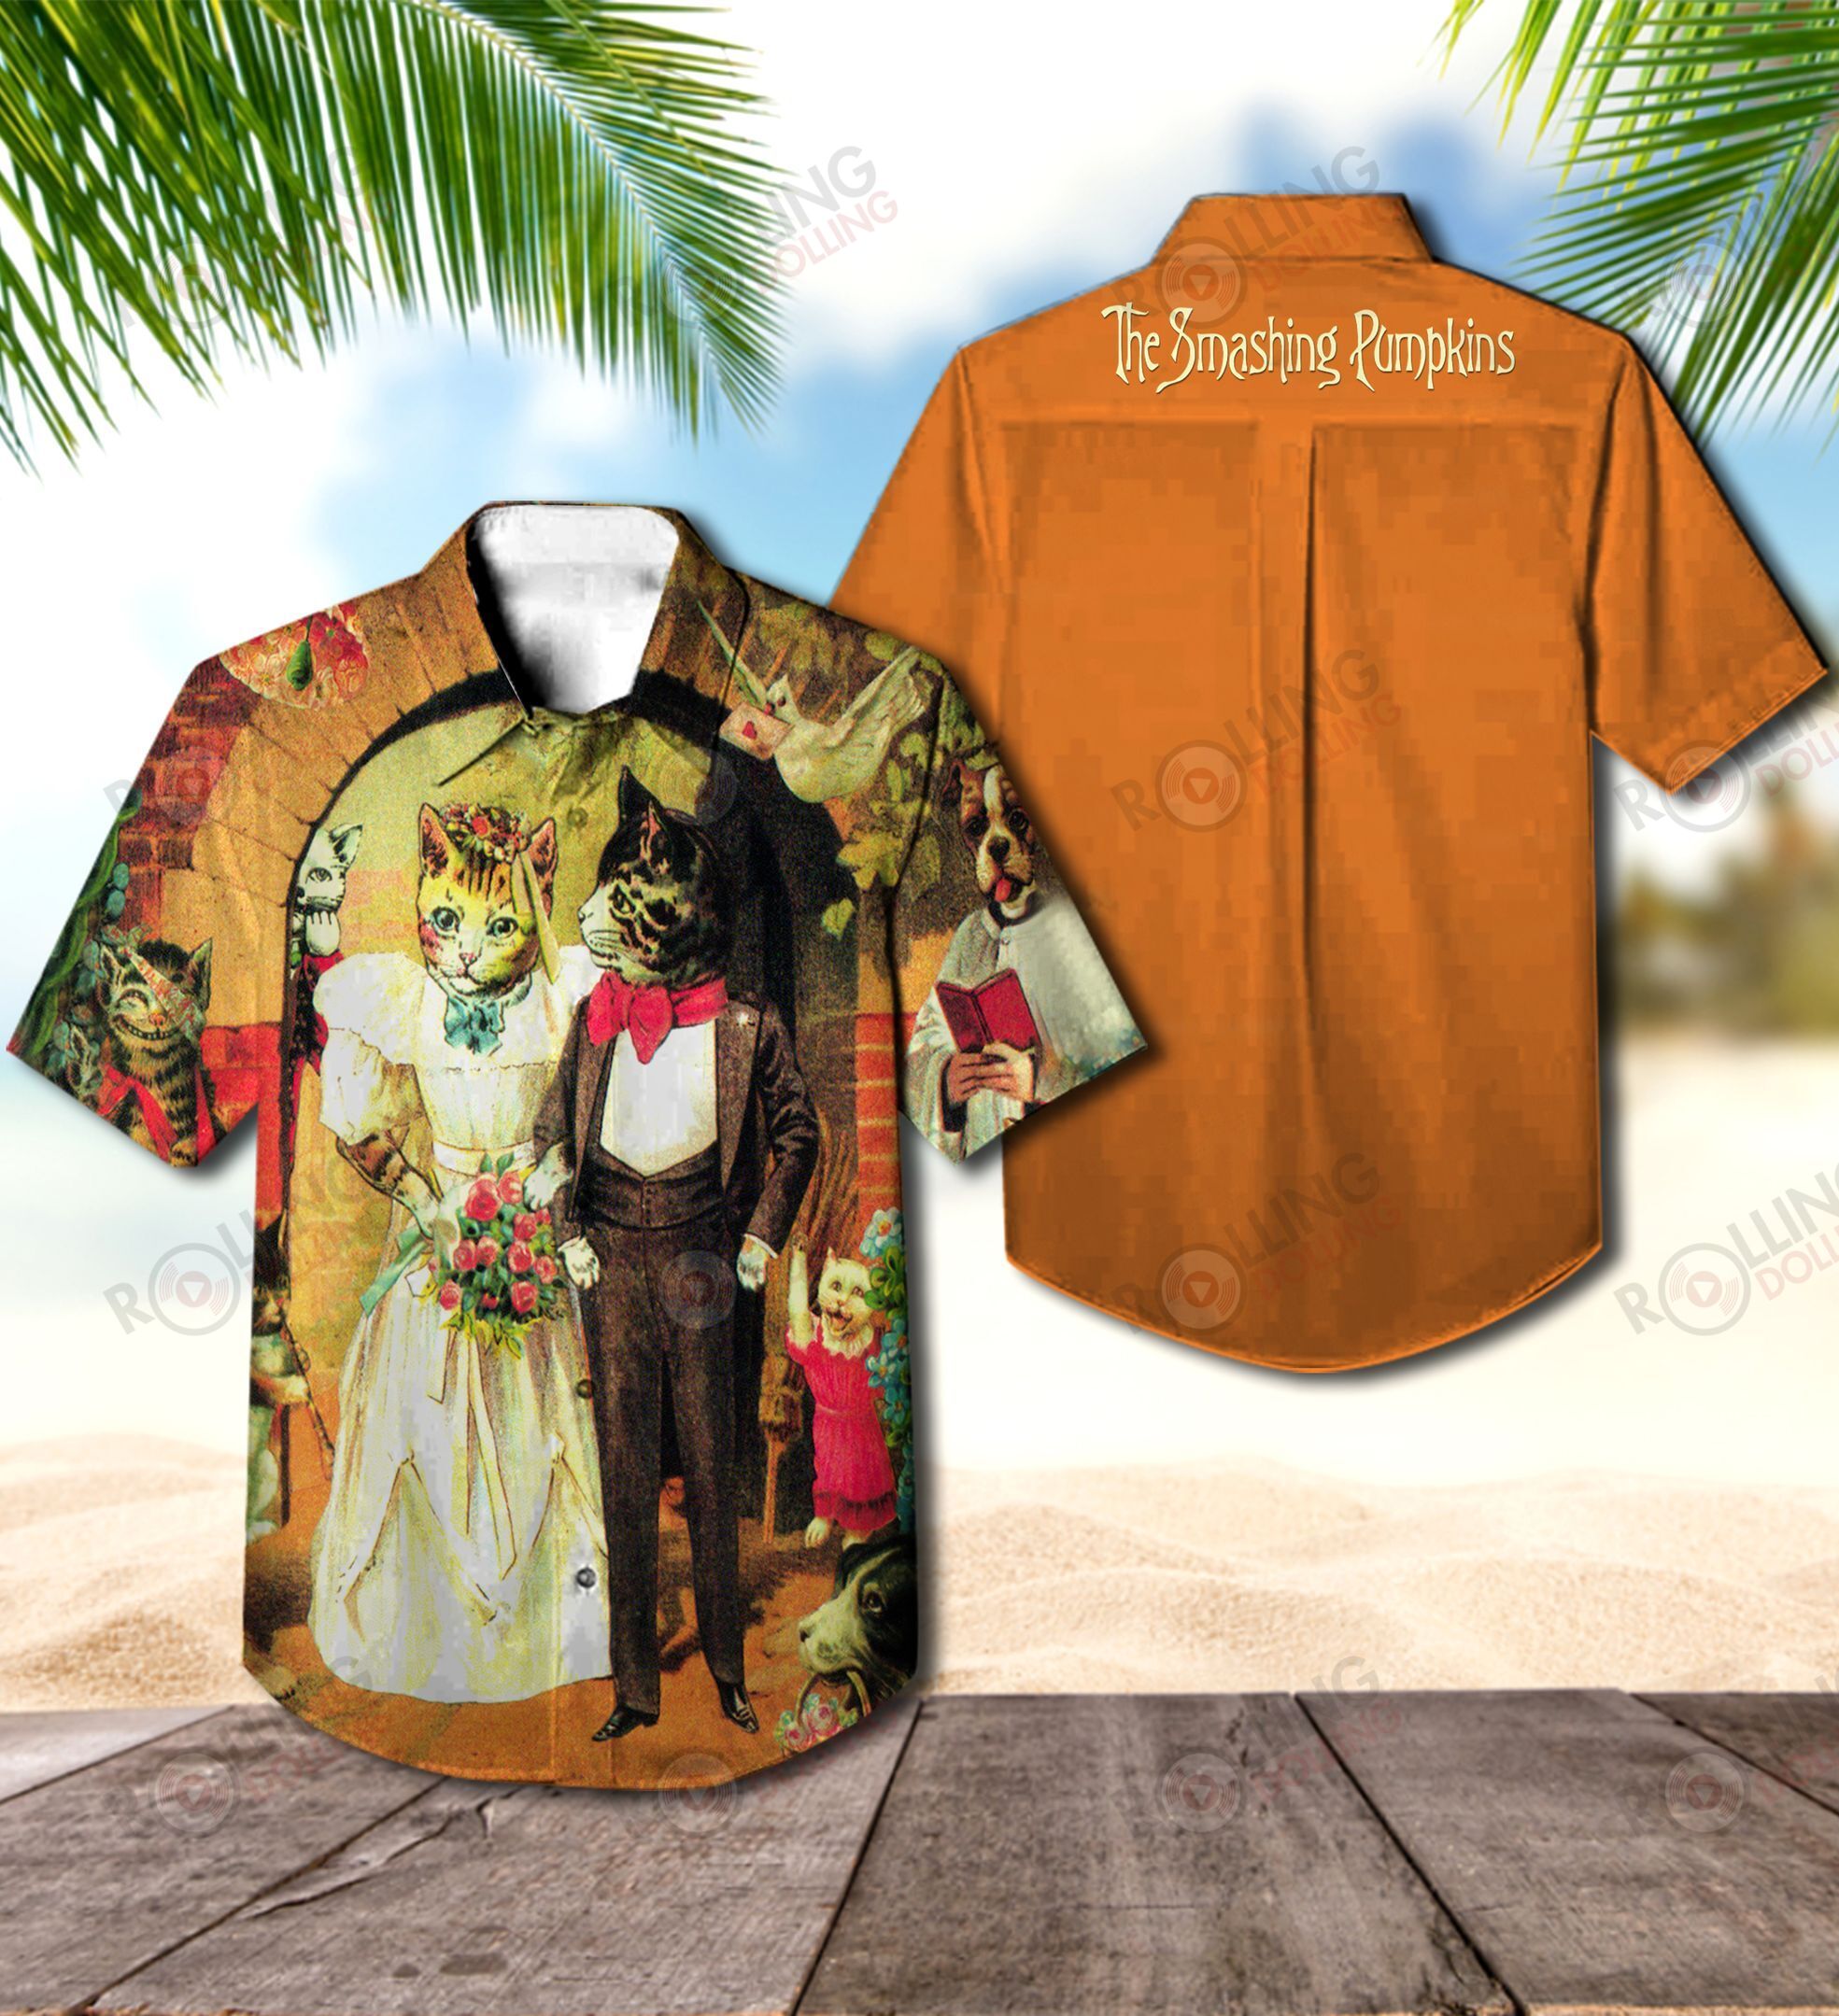 This would make a great gift for any fan who loves Hawaiian Shirt as well as Rock band 121